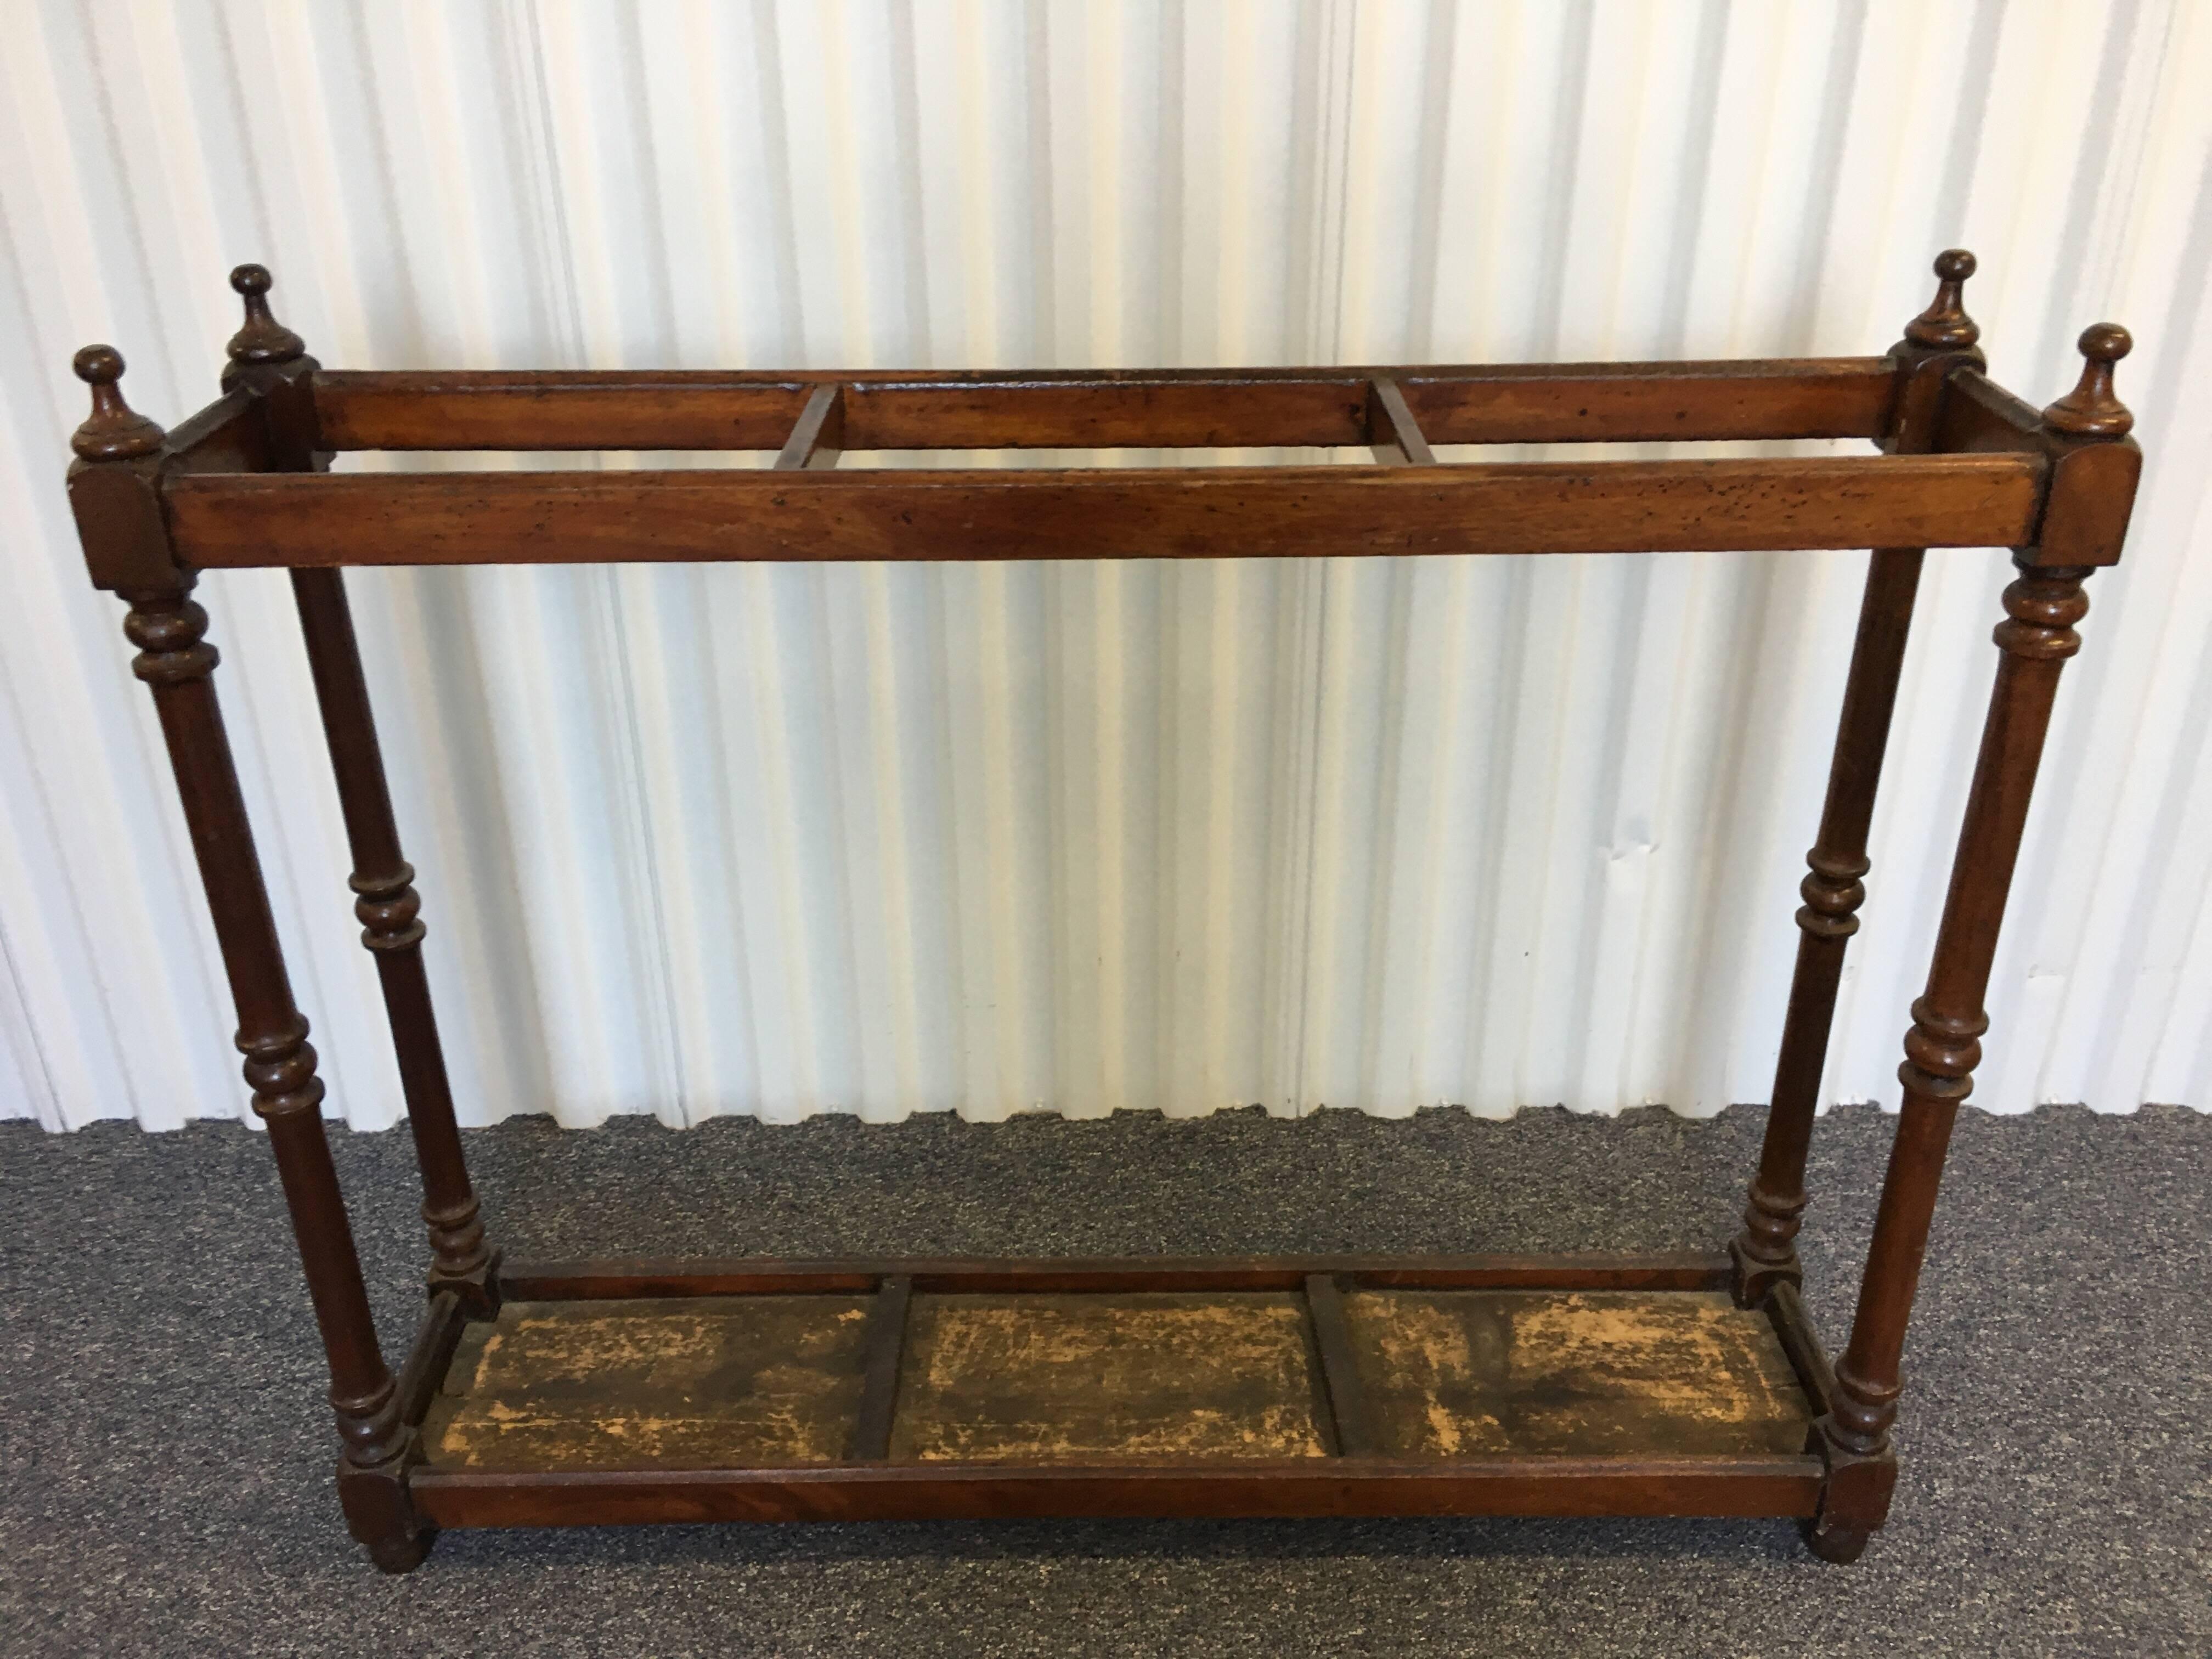 English Victorian rectangular stick umbrella hall stand. Made in solid turned wood with finials and three dividers.